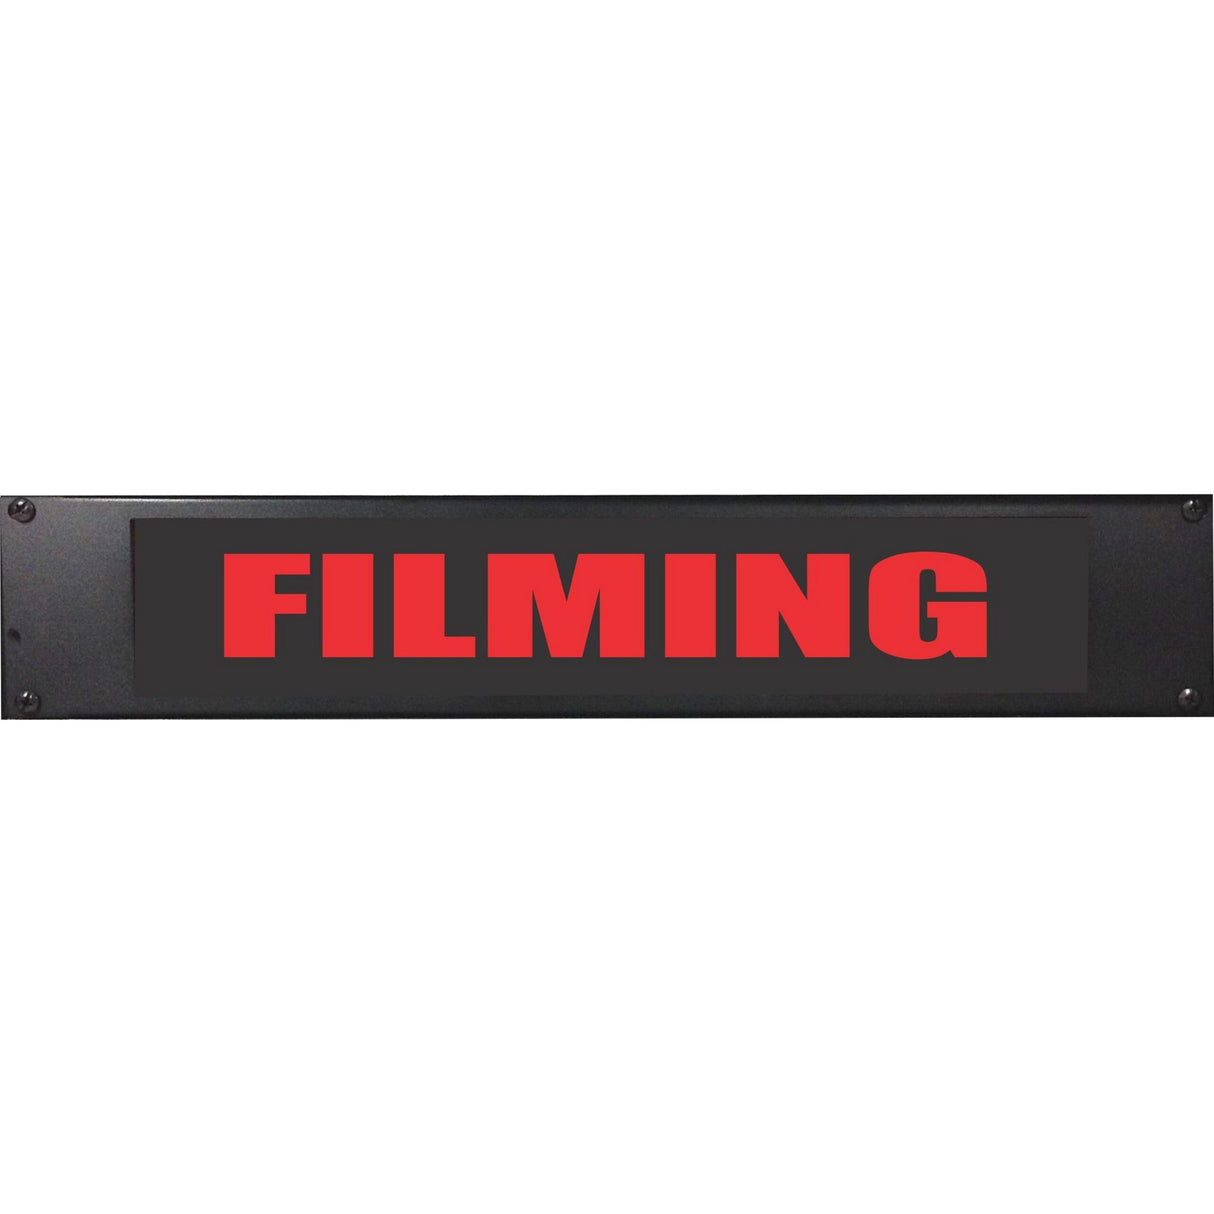 American Recorder OAS-4006RD "FILMING" 2U Rackmount LED Lighted Sign, Red